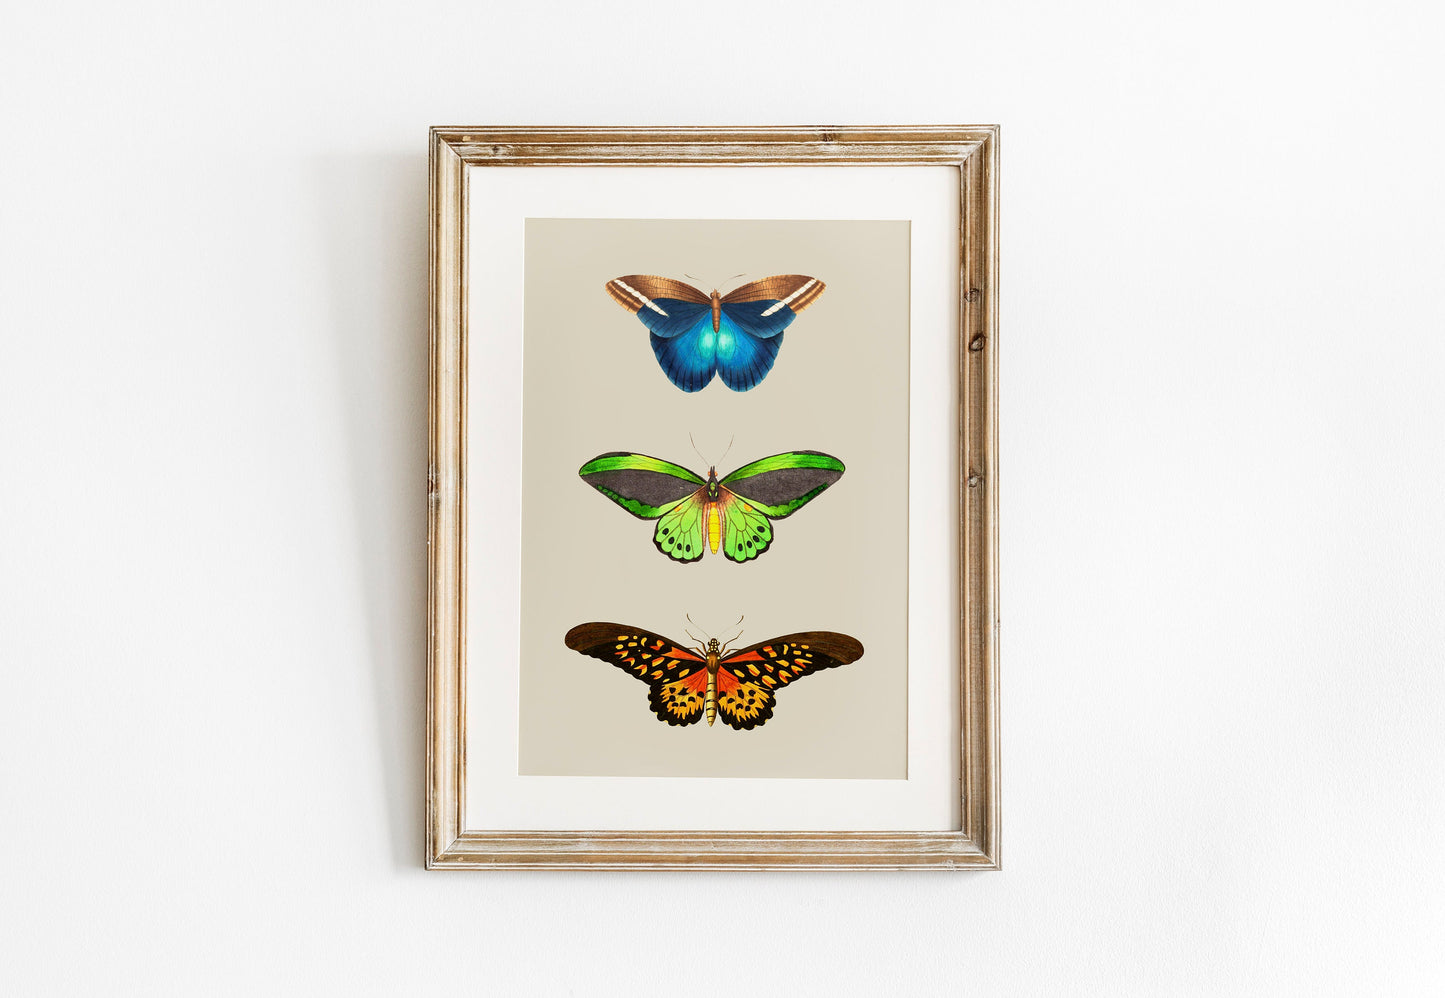 Butterfly Wall Art Print , Vintage Butterfly Print, Unframed, Butterflies, A4, A3, A2, A1, Butterfly Poster, Butterfly Gift, Vintage Decor,